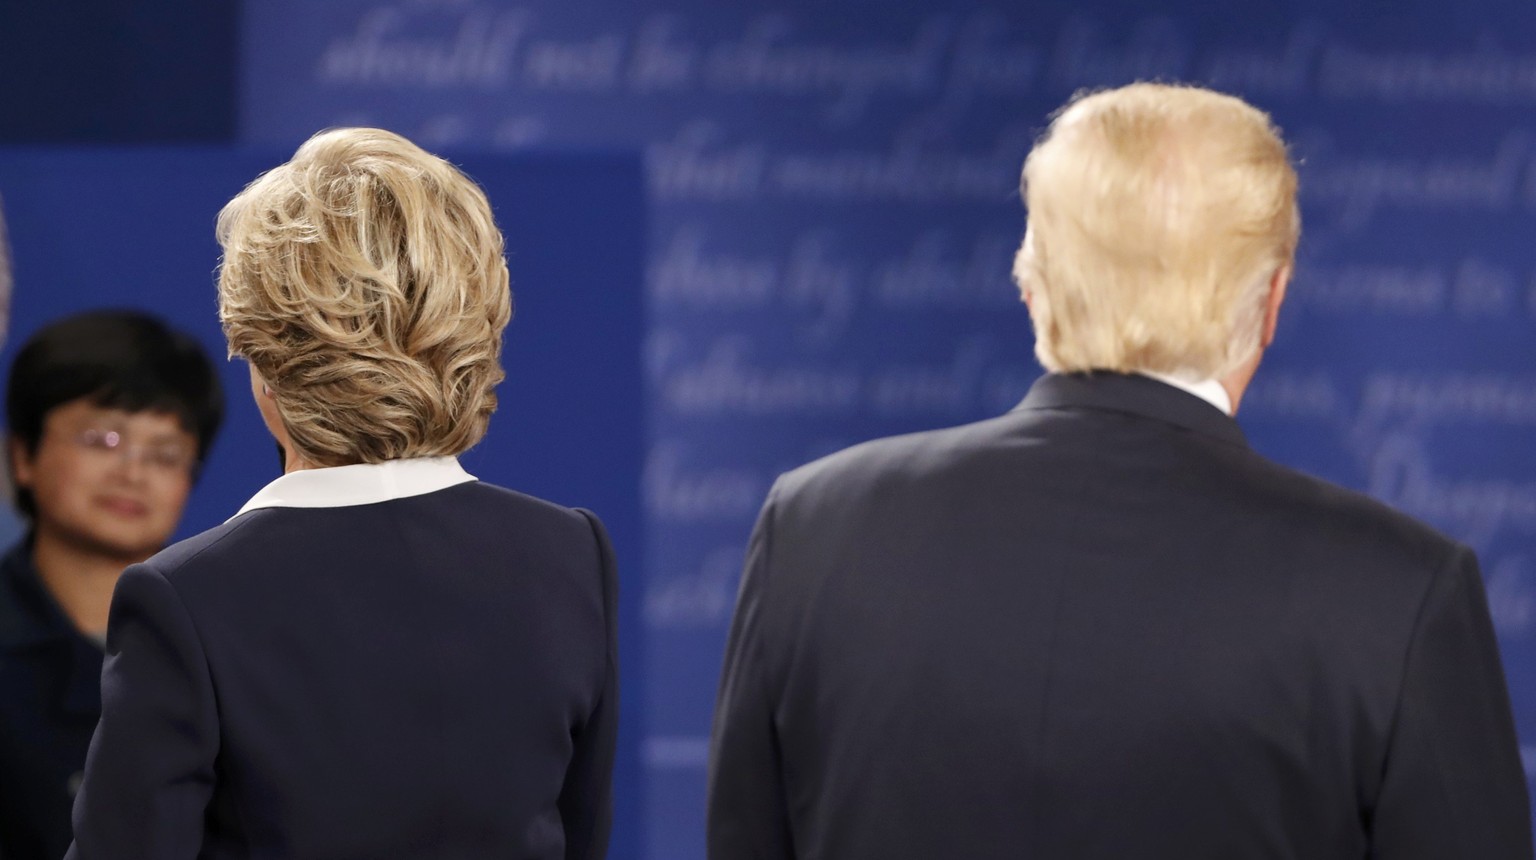 Republican U.S. presidential nominee Donald Trump and Democratic U.S. presidential nominee Hillary Clinton face the audience during their presidential town hall debate at Washington University in St.  ...